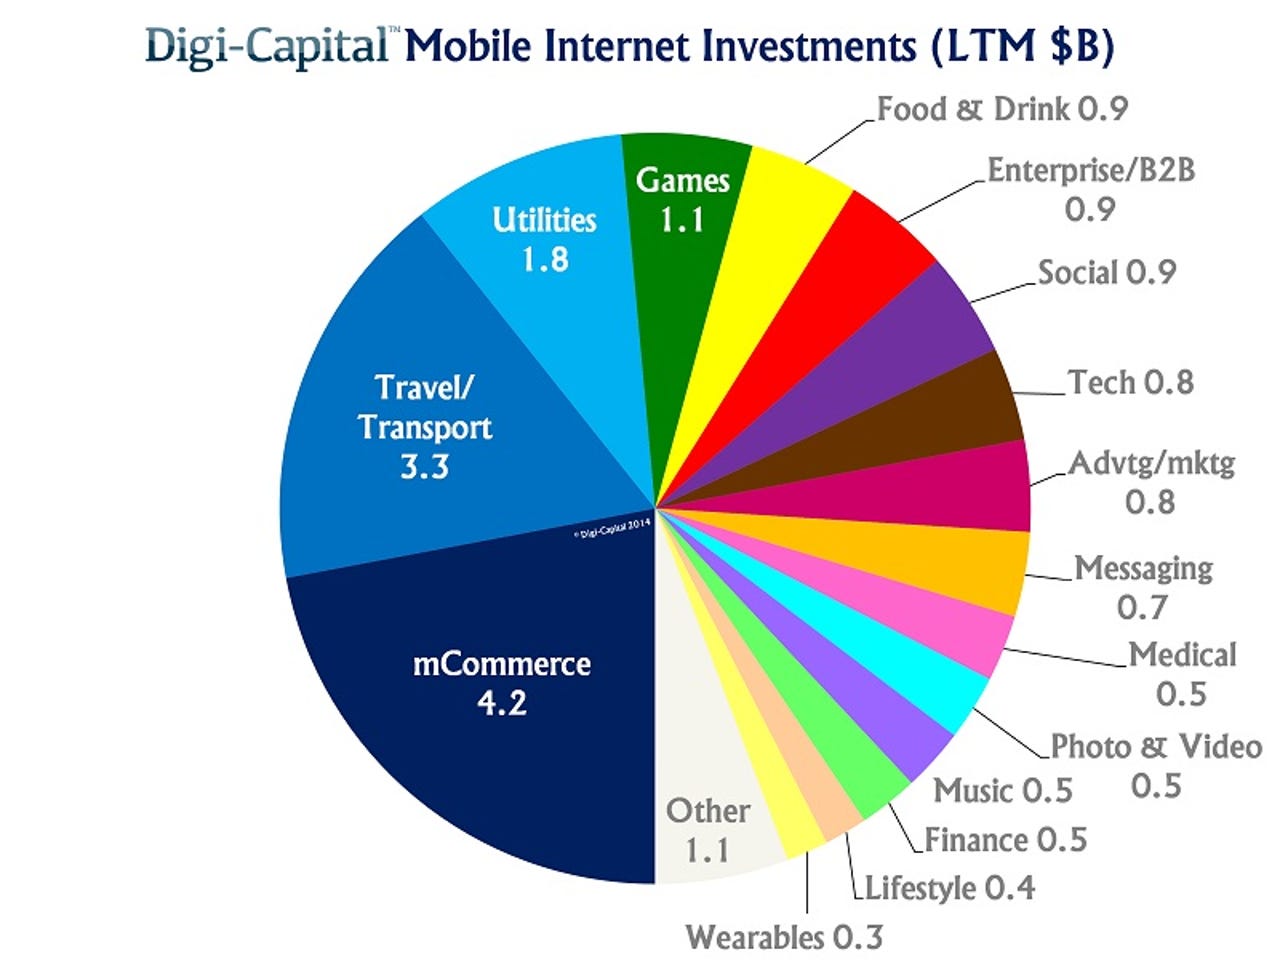 Mobile internet investment - 19.2B invested (1)